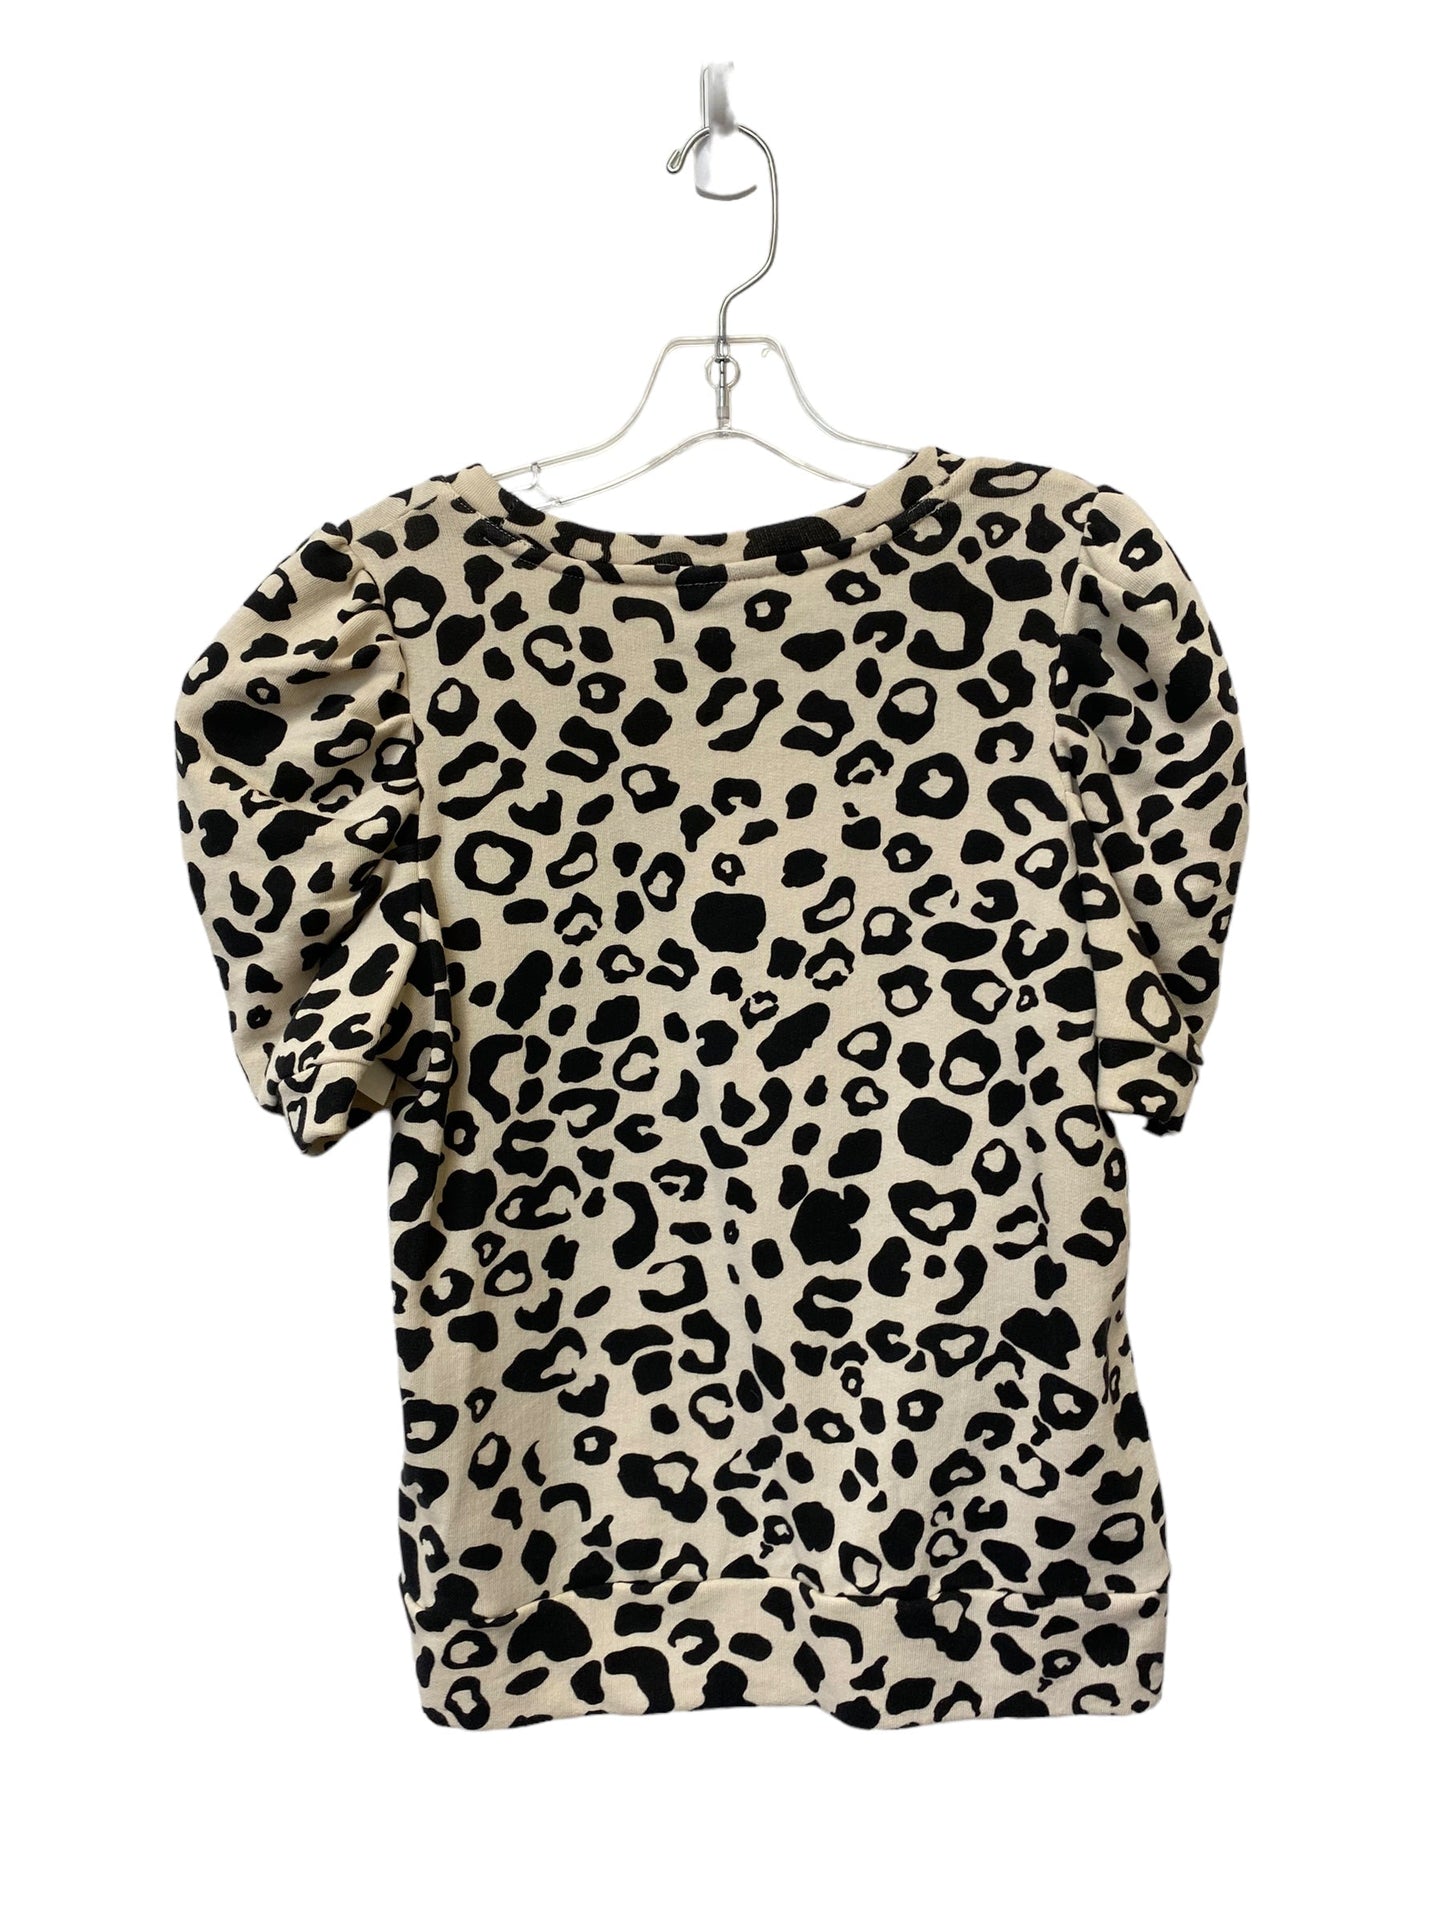 Animal Print Top Short Sleeve Who What Wear, Size S